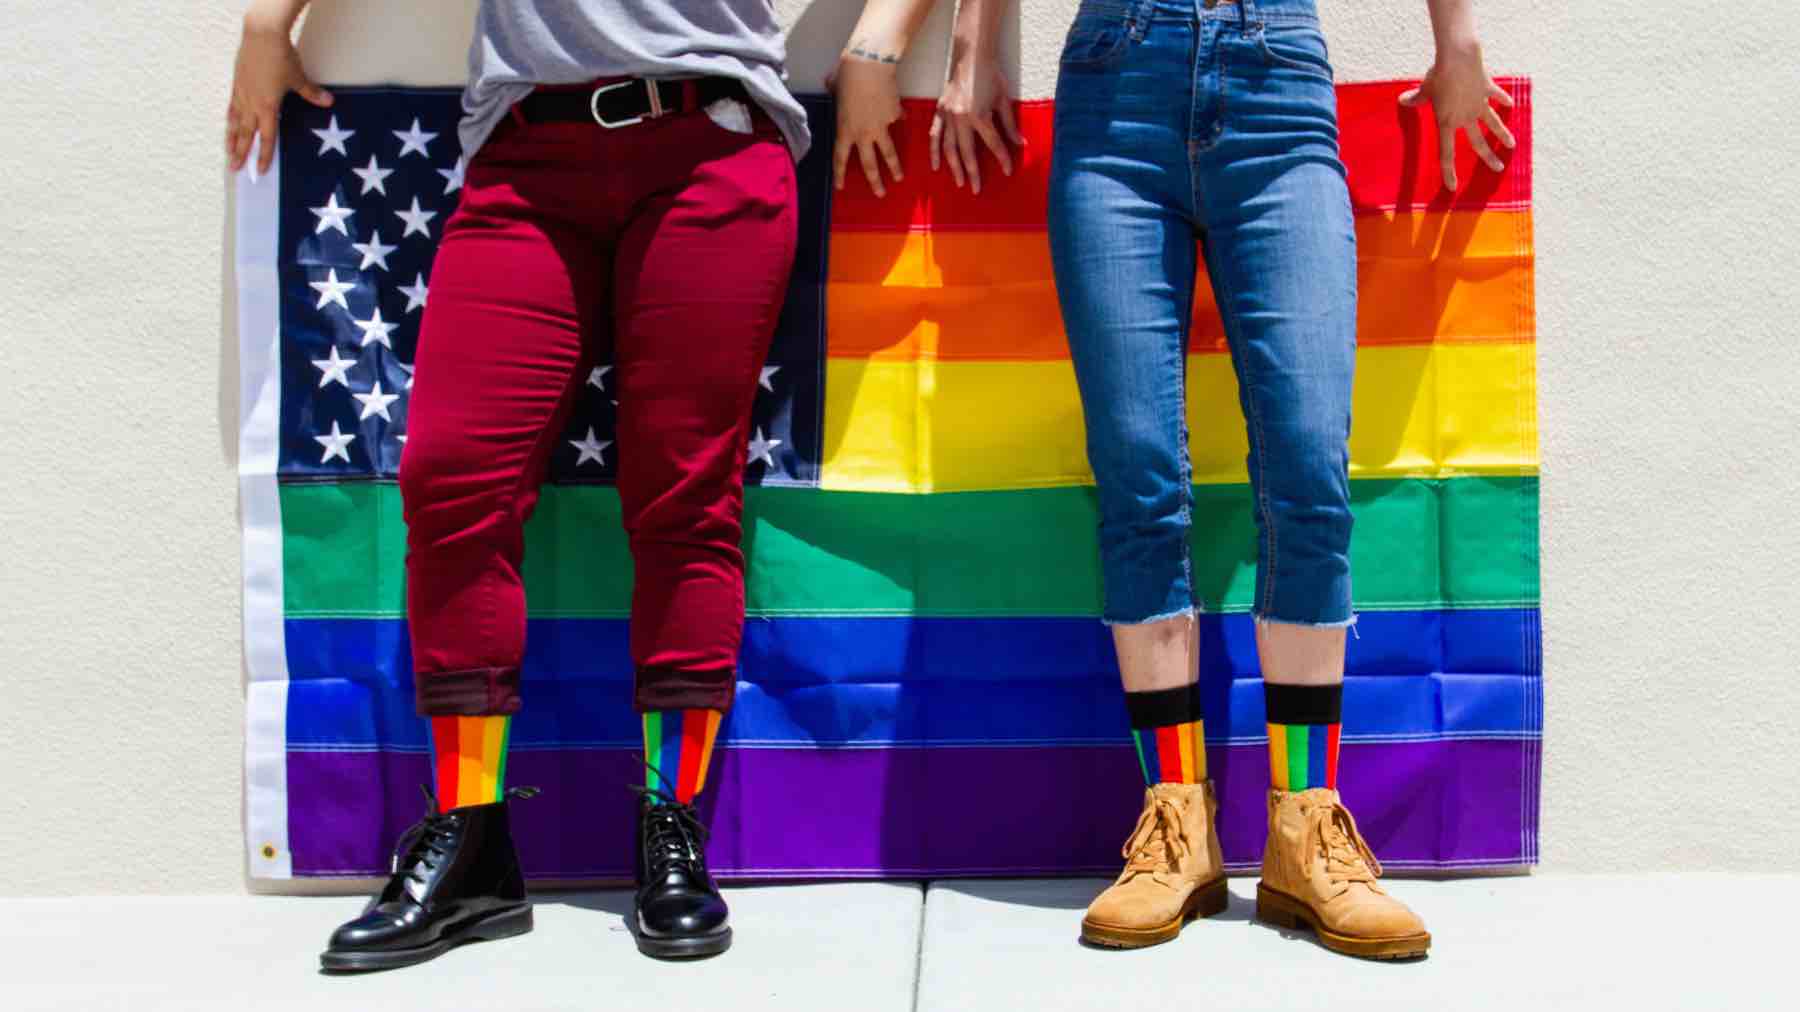 Step into Pride Month with Colorful Socks - Sock Season